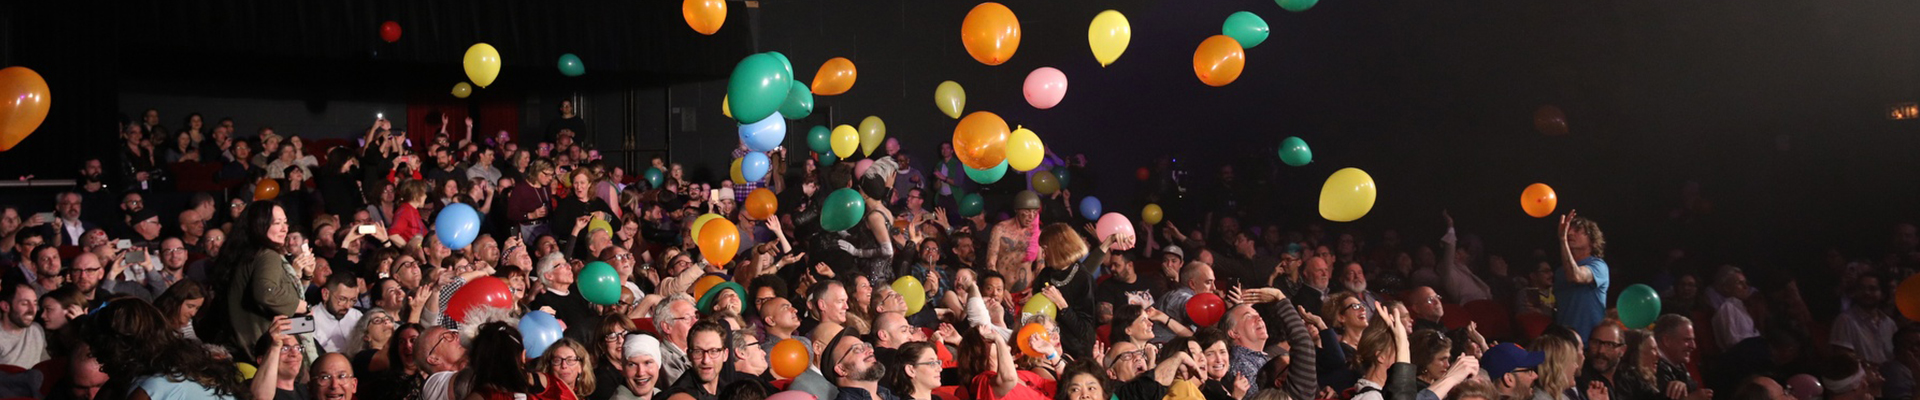 Audience enjoying balloons above their heads